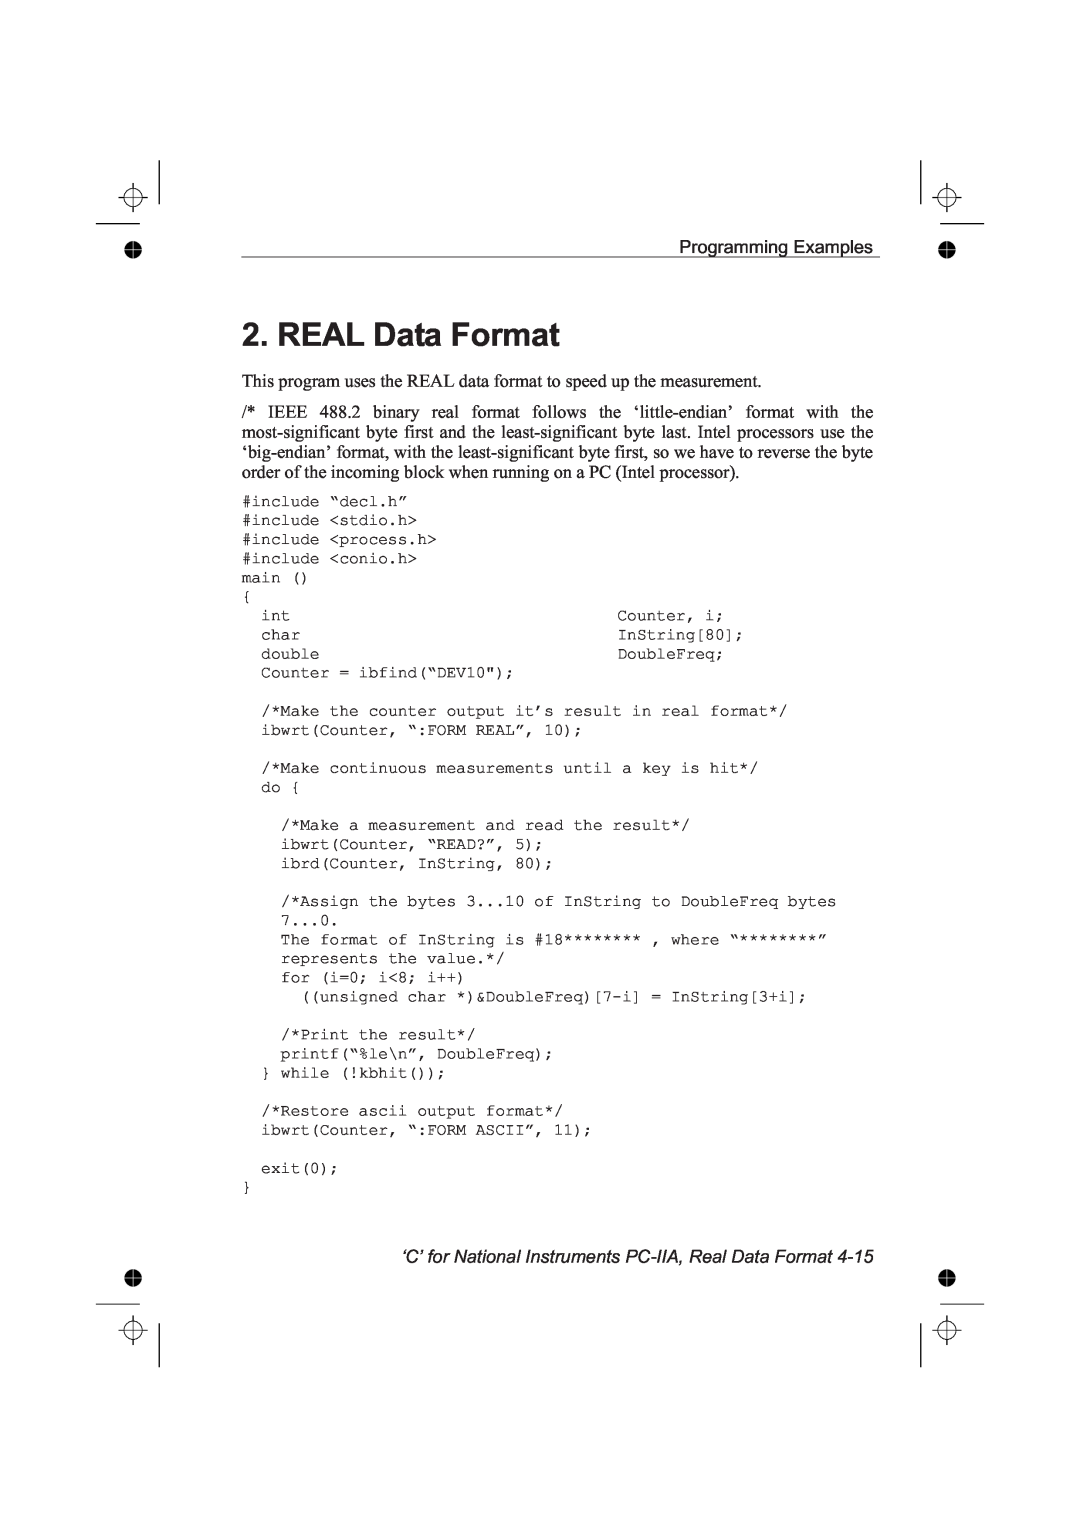 Fluke PM6681R, PM6685R manual REAL Data Format, ‘C’ for National Instruments PC-IIA, Real Data Format 